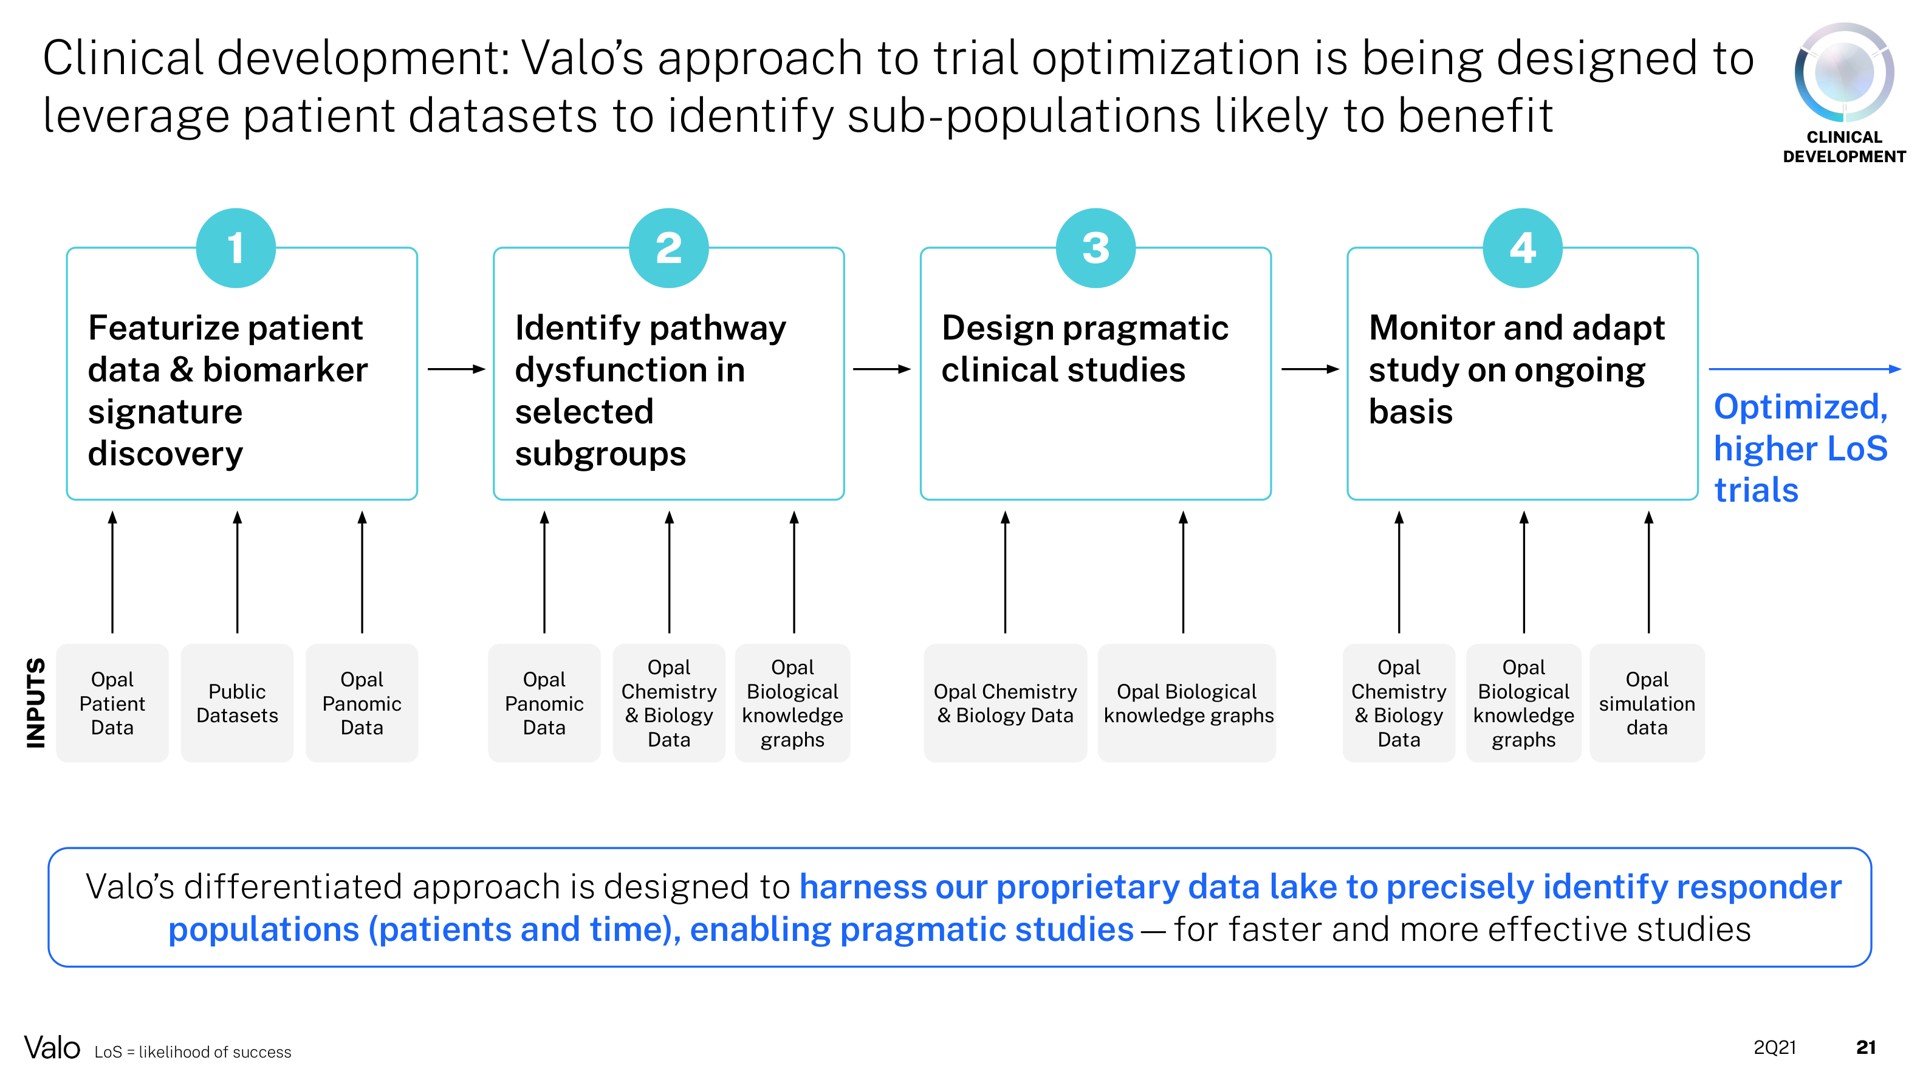 clinical development approach to trial optimization is being designed to leverage patient to identify sub populations likely to bene benefit | Valo